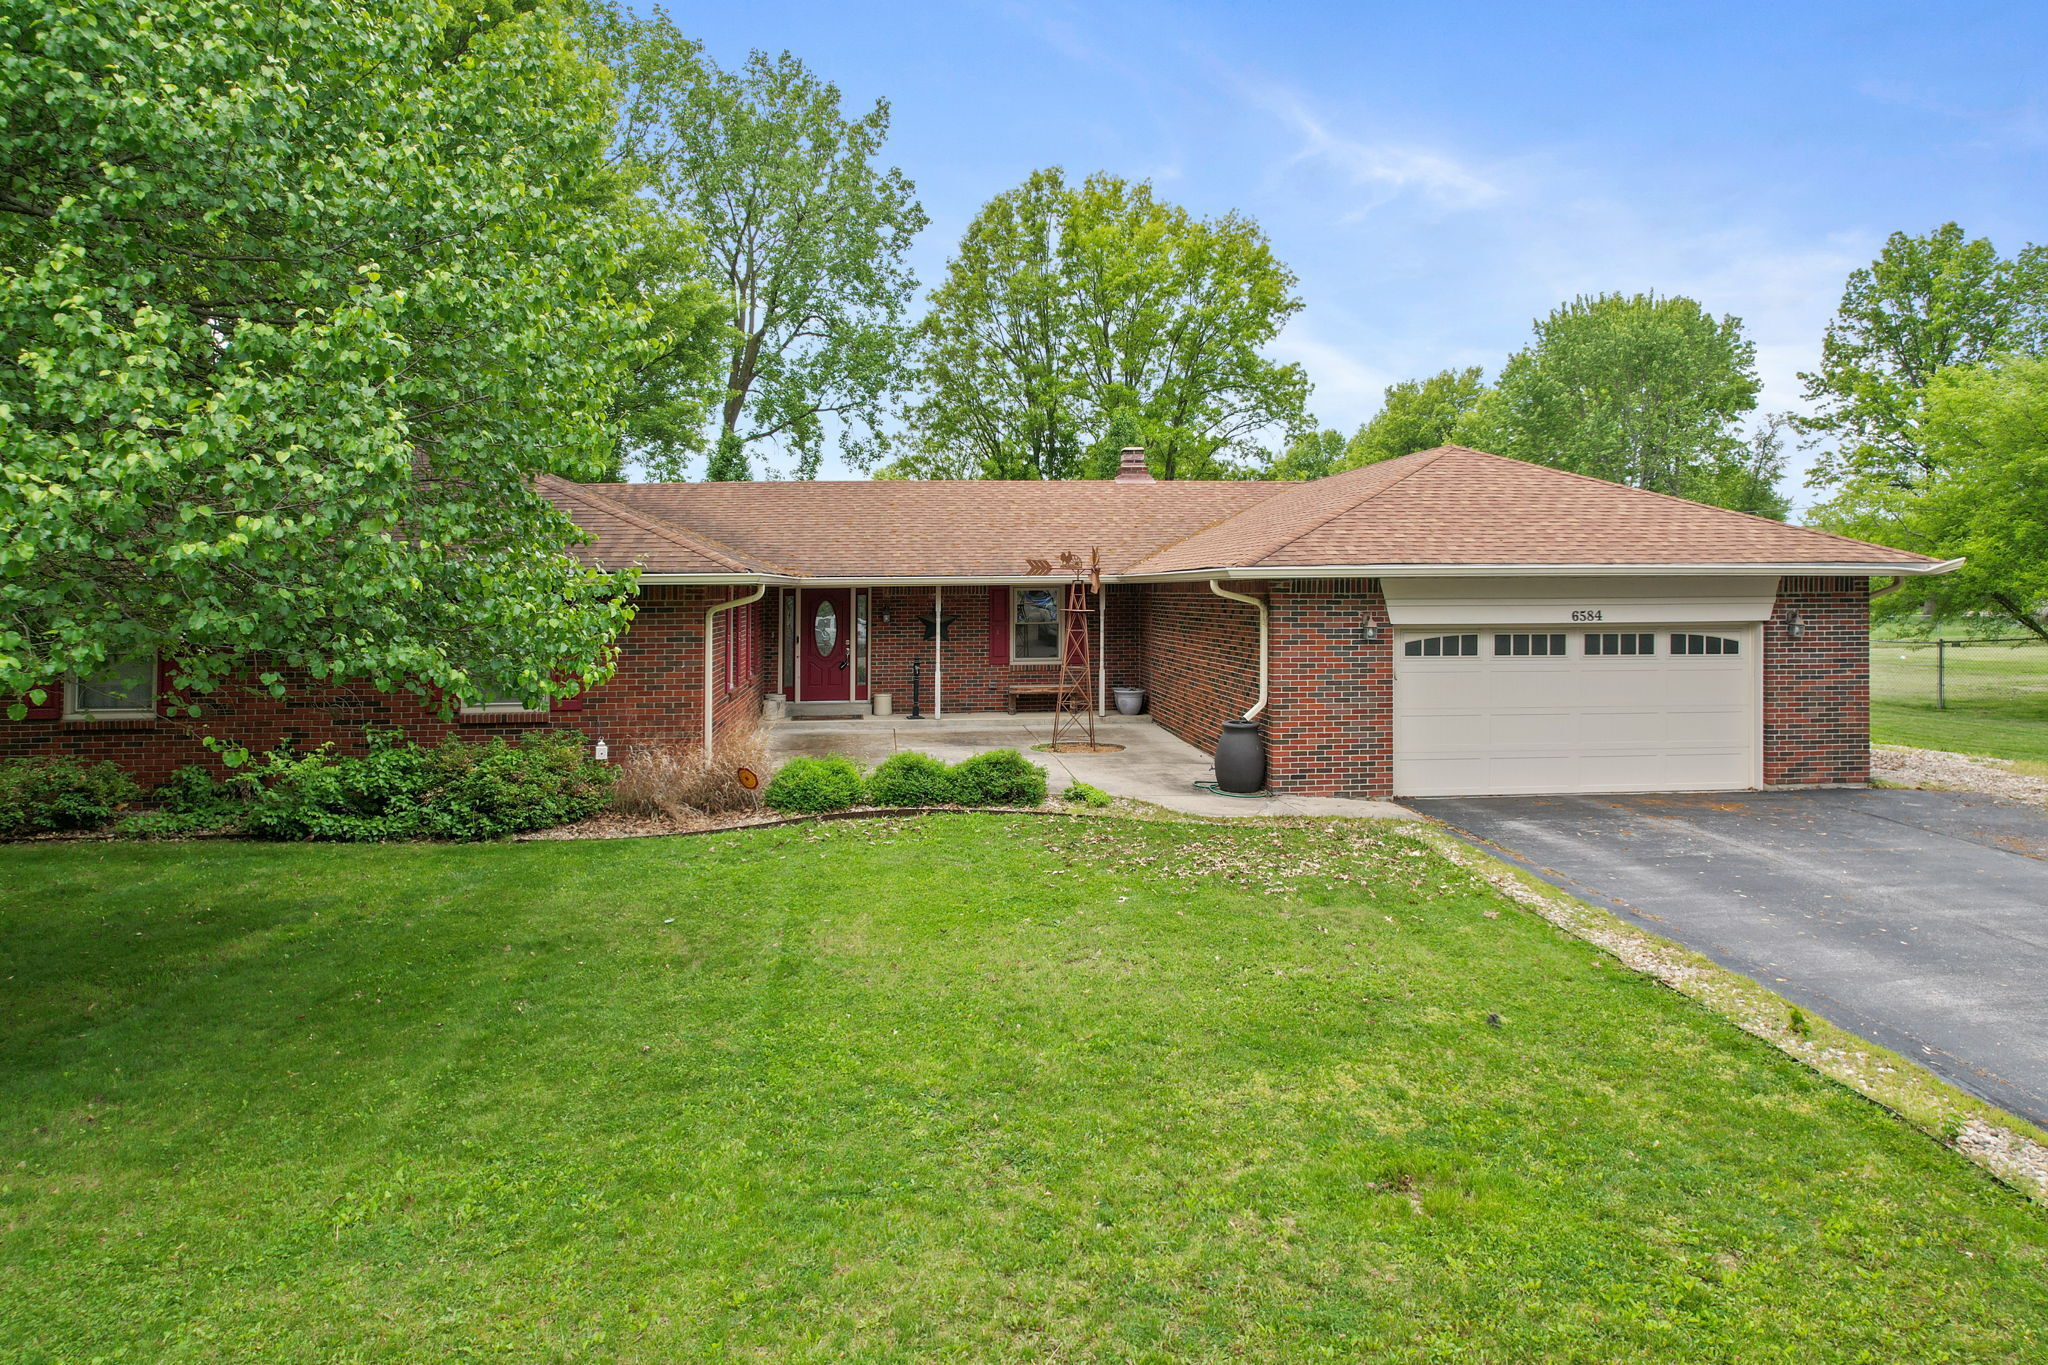 Photo of 6584 Weil Drive Brownsburg, IN 46112